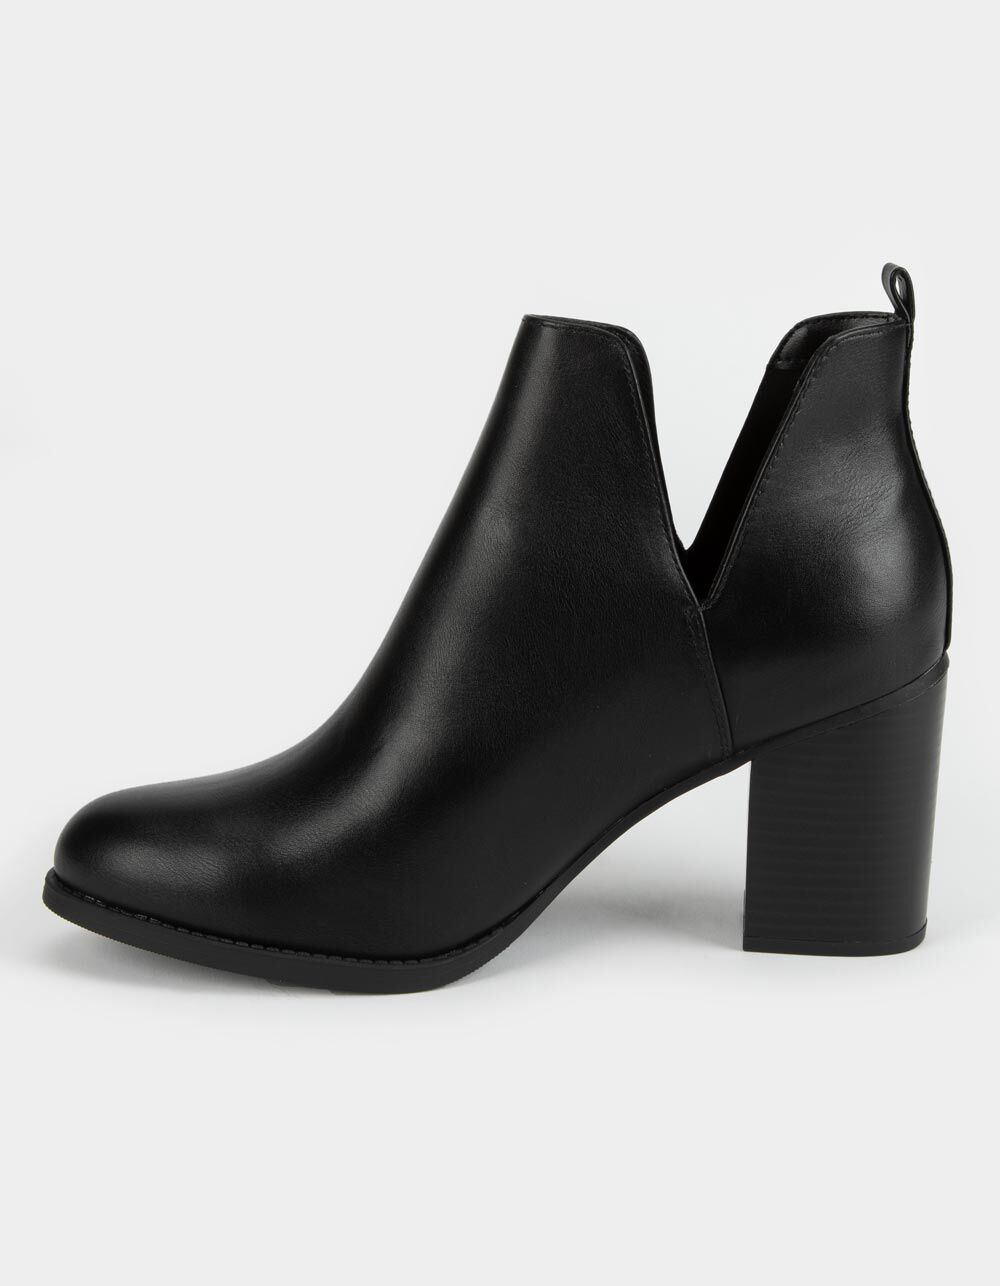 SODA Chop Out Womens Vegan Leather Booties - BLACK | Tillys